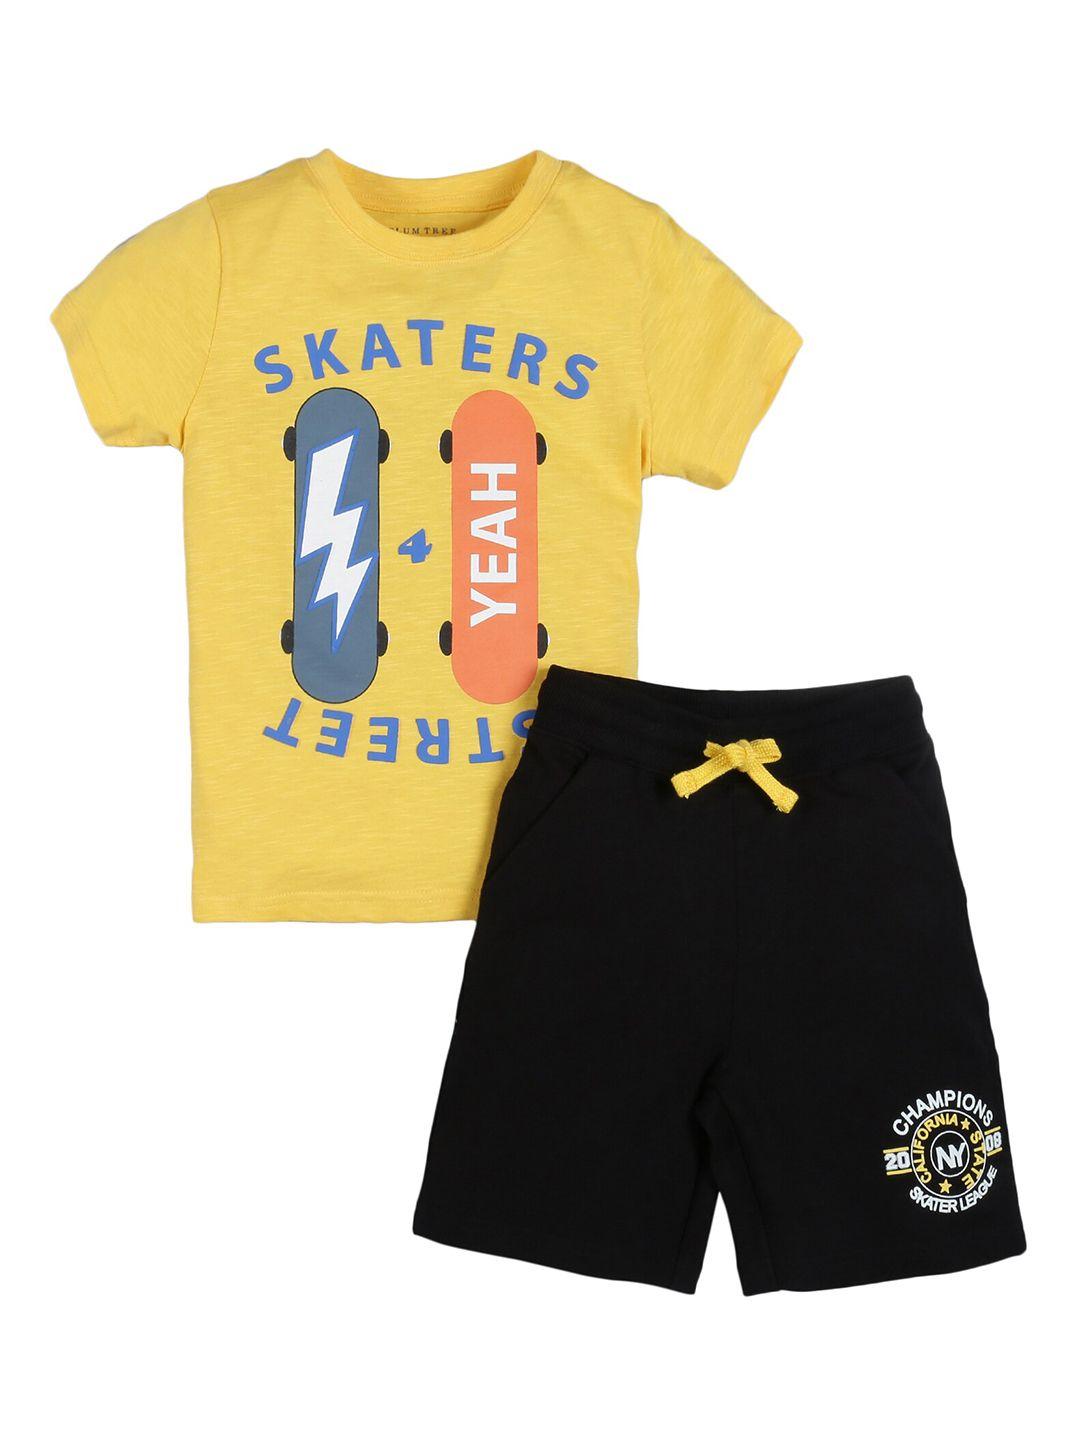 plum tree boys yellow & black printed top with shorts